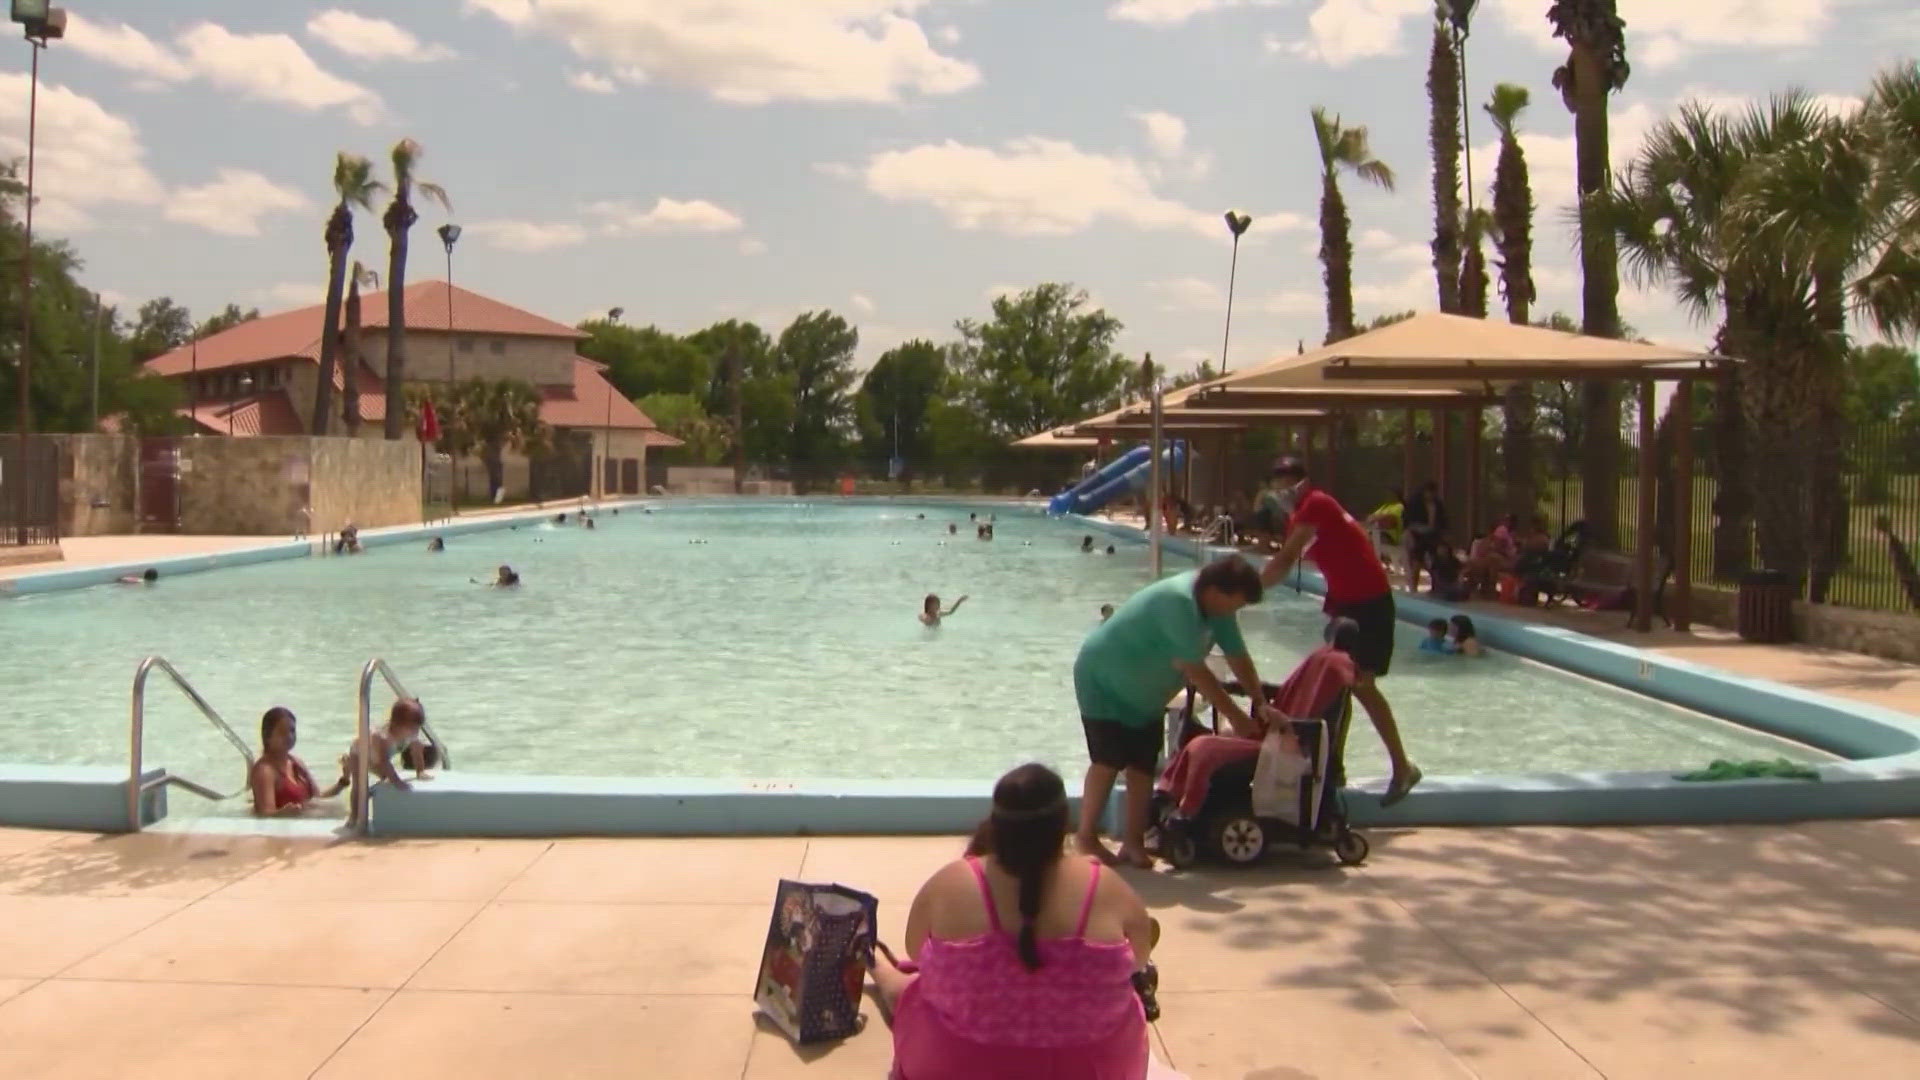 The pools will be opening May 11, and will be open every weekend.